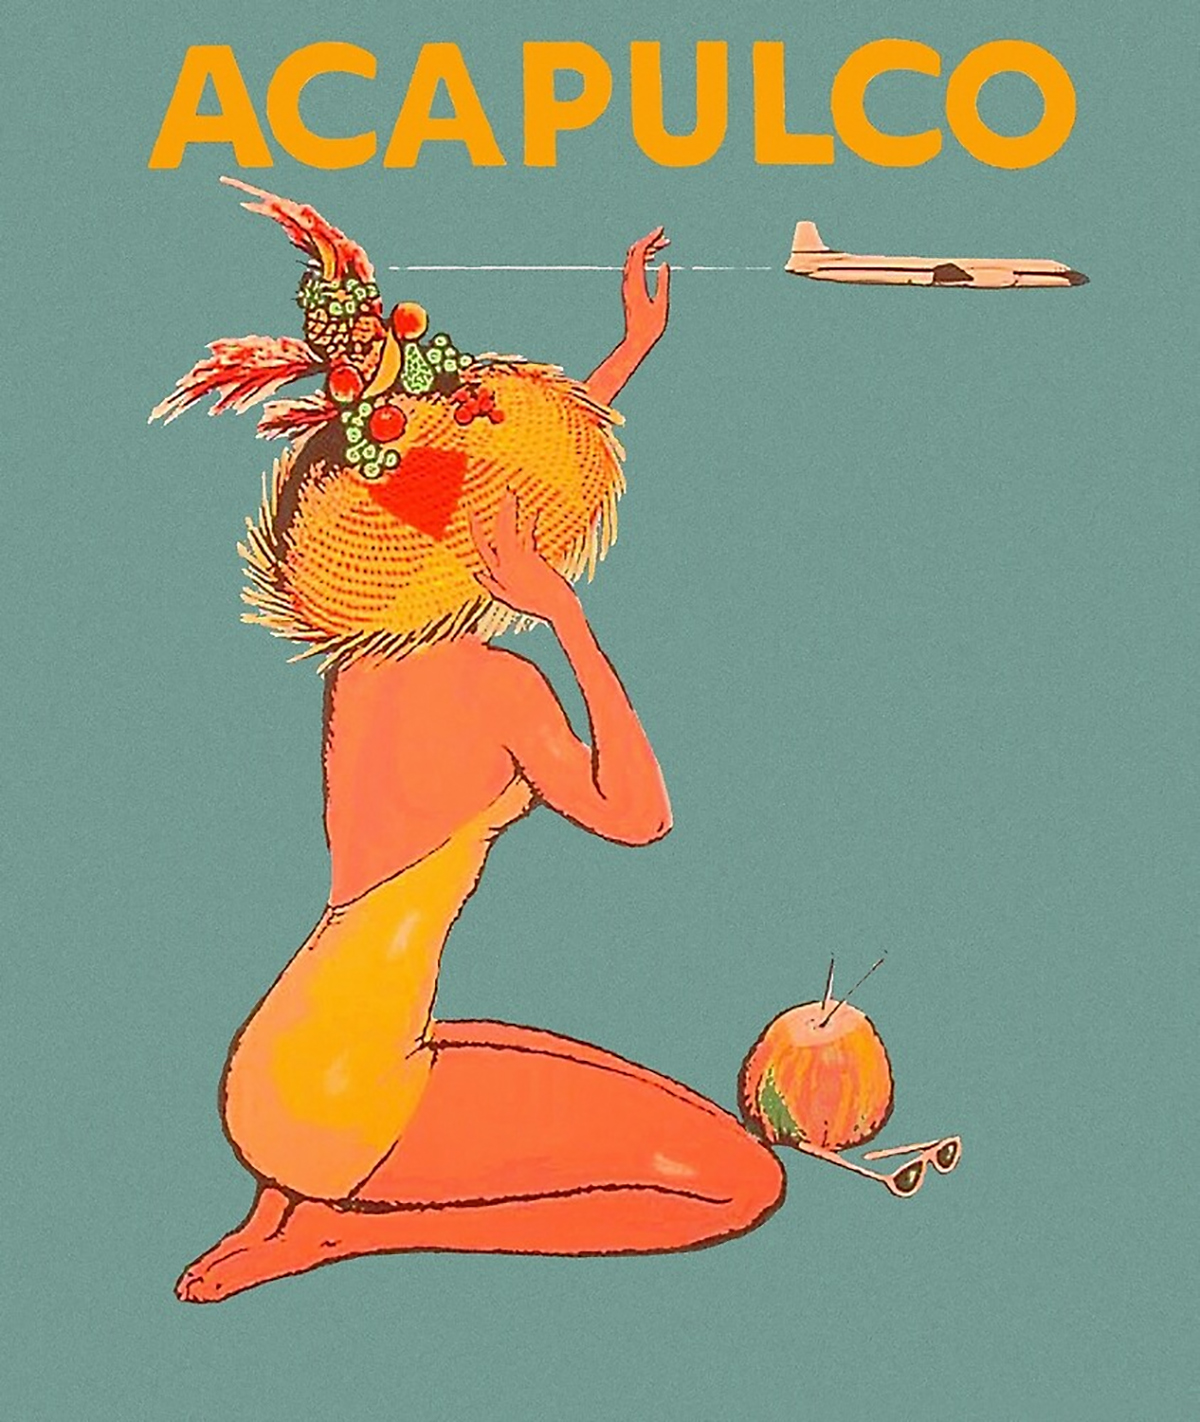 Acapulco travel poster, 1950s